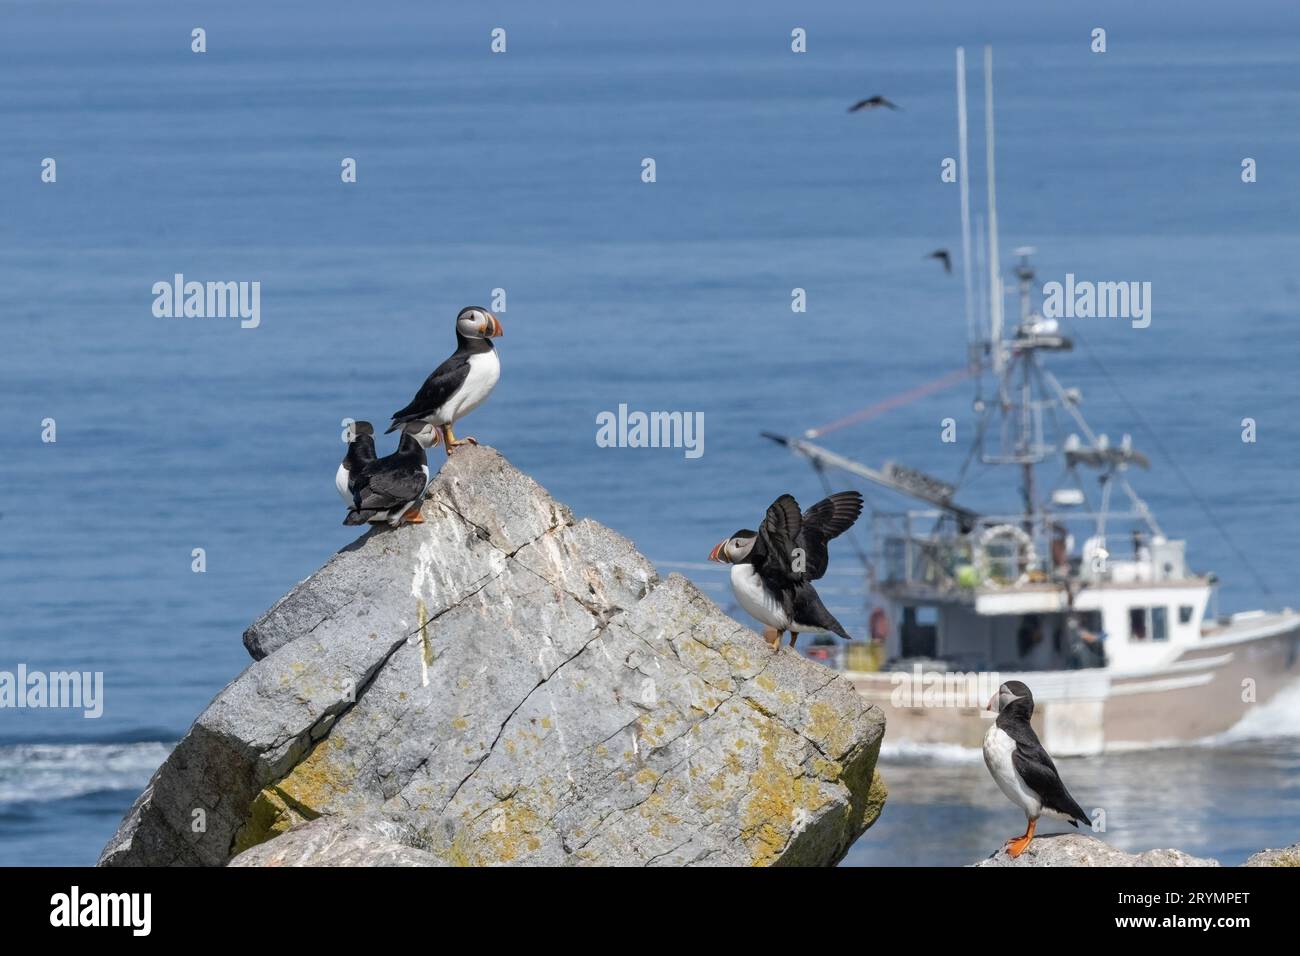 Atlantic Puffins perched and flying along a rocky island edge. Lobster fishing boat in background, Canada & Maine USA. Stock Photo